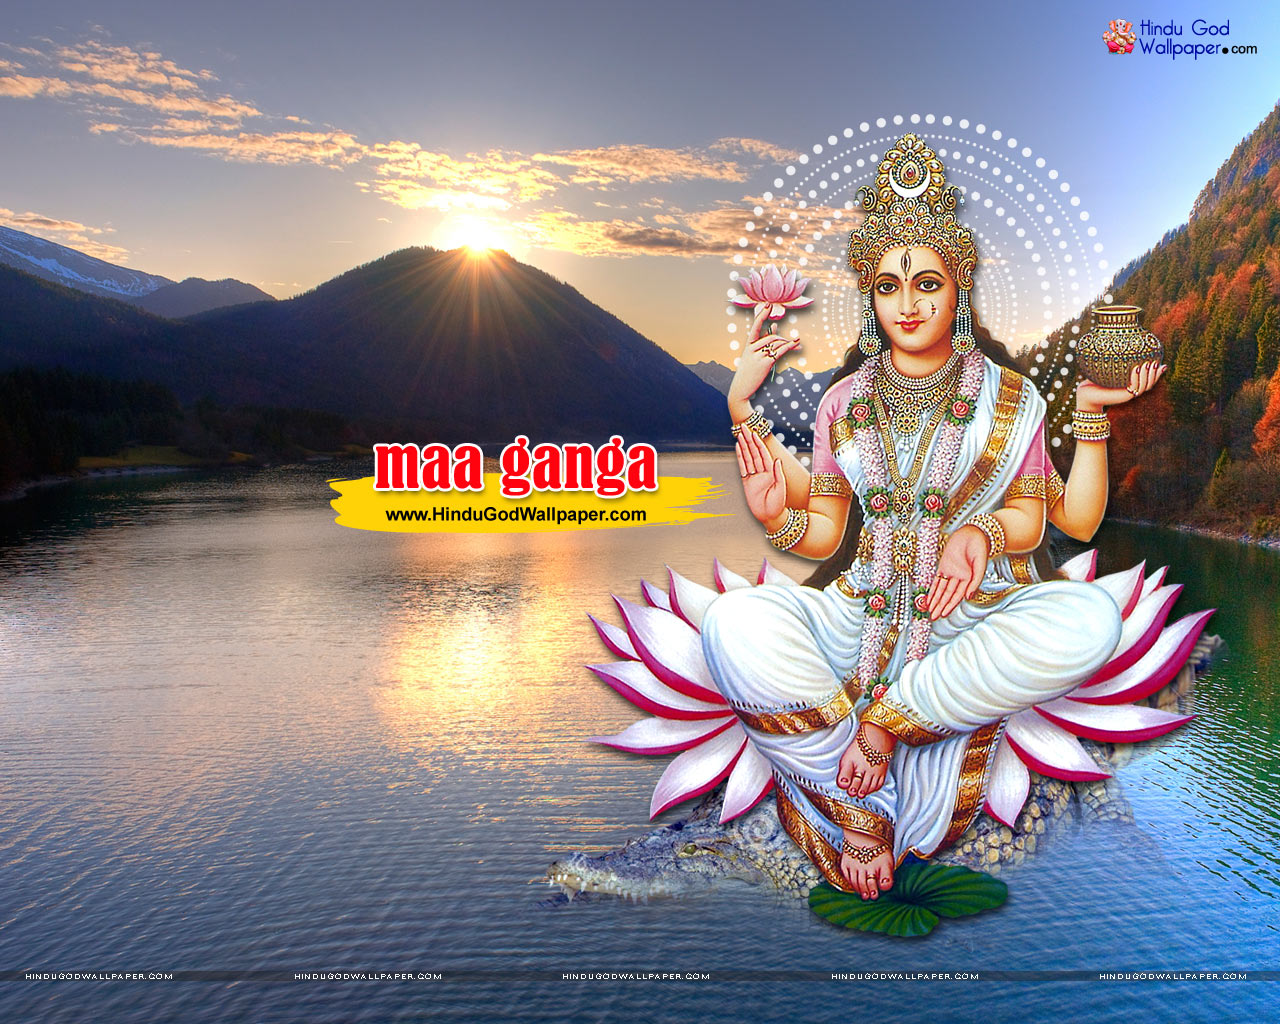 Maa Ganga Wallpapers, Pictures & Images Free Download